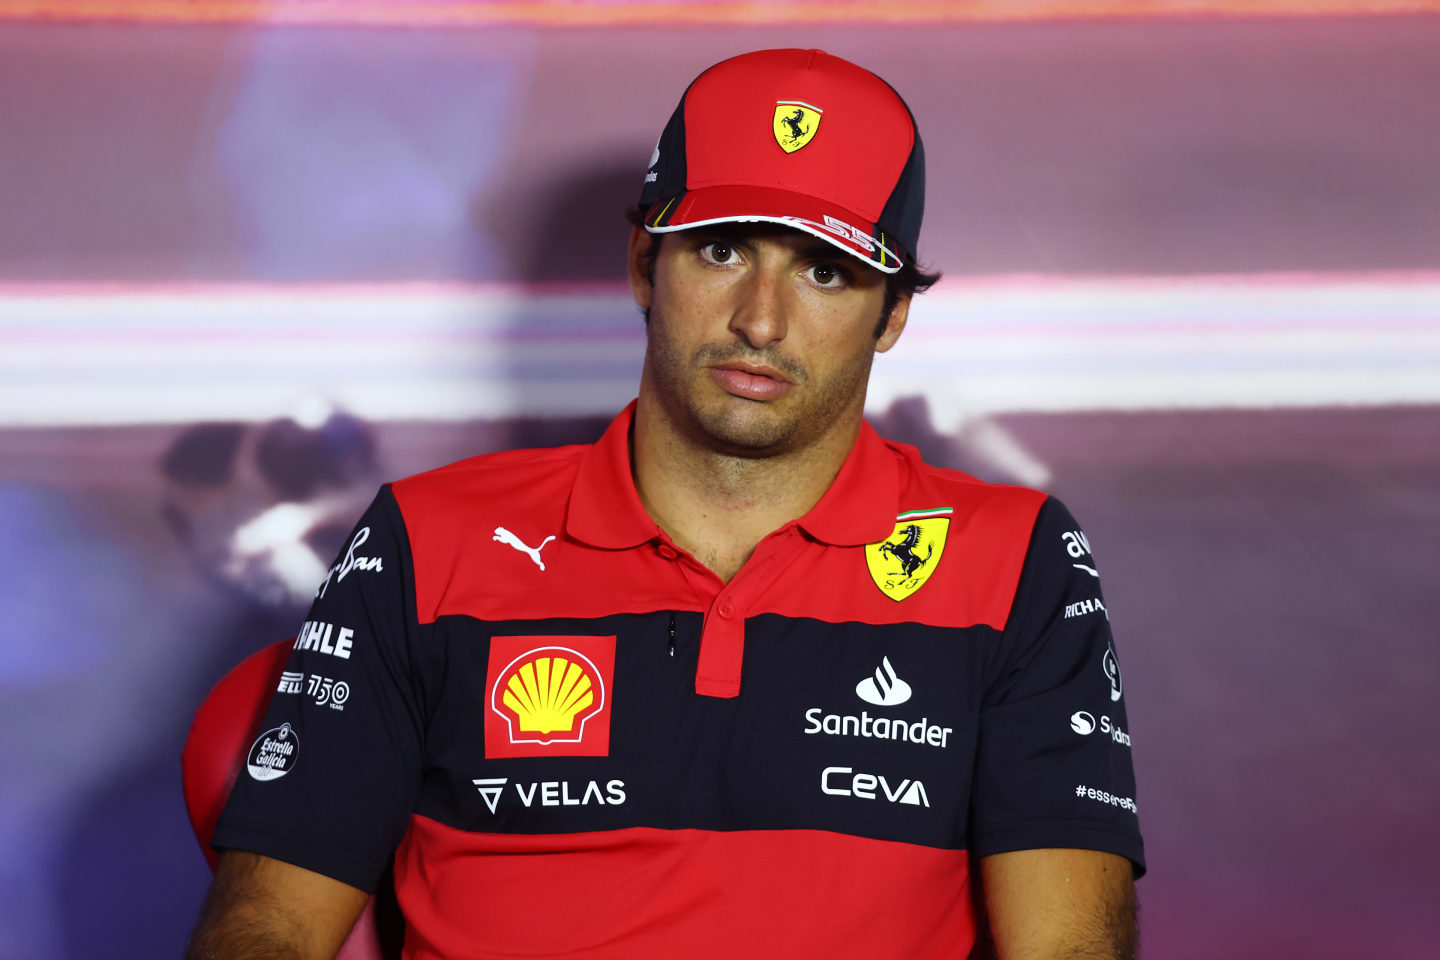 ZANDVOORT, NETHERLANDS - SEPTEMBER 01: Carlos Sainz of Spain and Ferrari attends the Drivers Press Conference during previews ahead of the F1 Grand Prix of The Netherlands at Circuit Zandvoort on September 01, 2022 in Zandvoort, Netherlands. (Photo by Lars Baron/Getty Images)